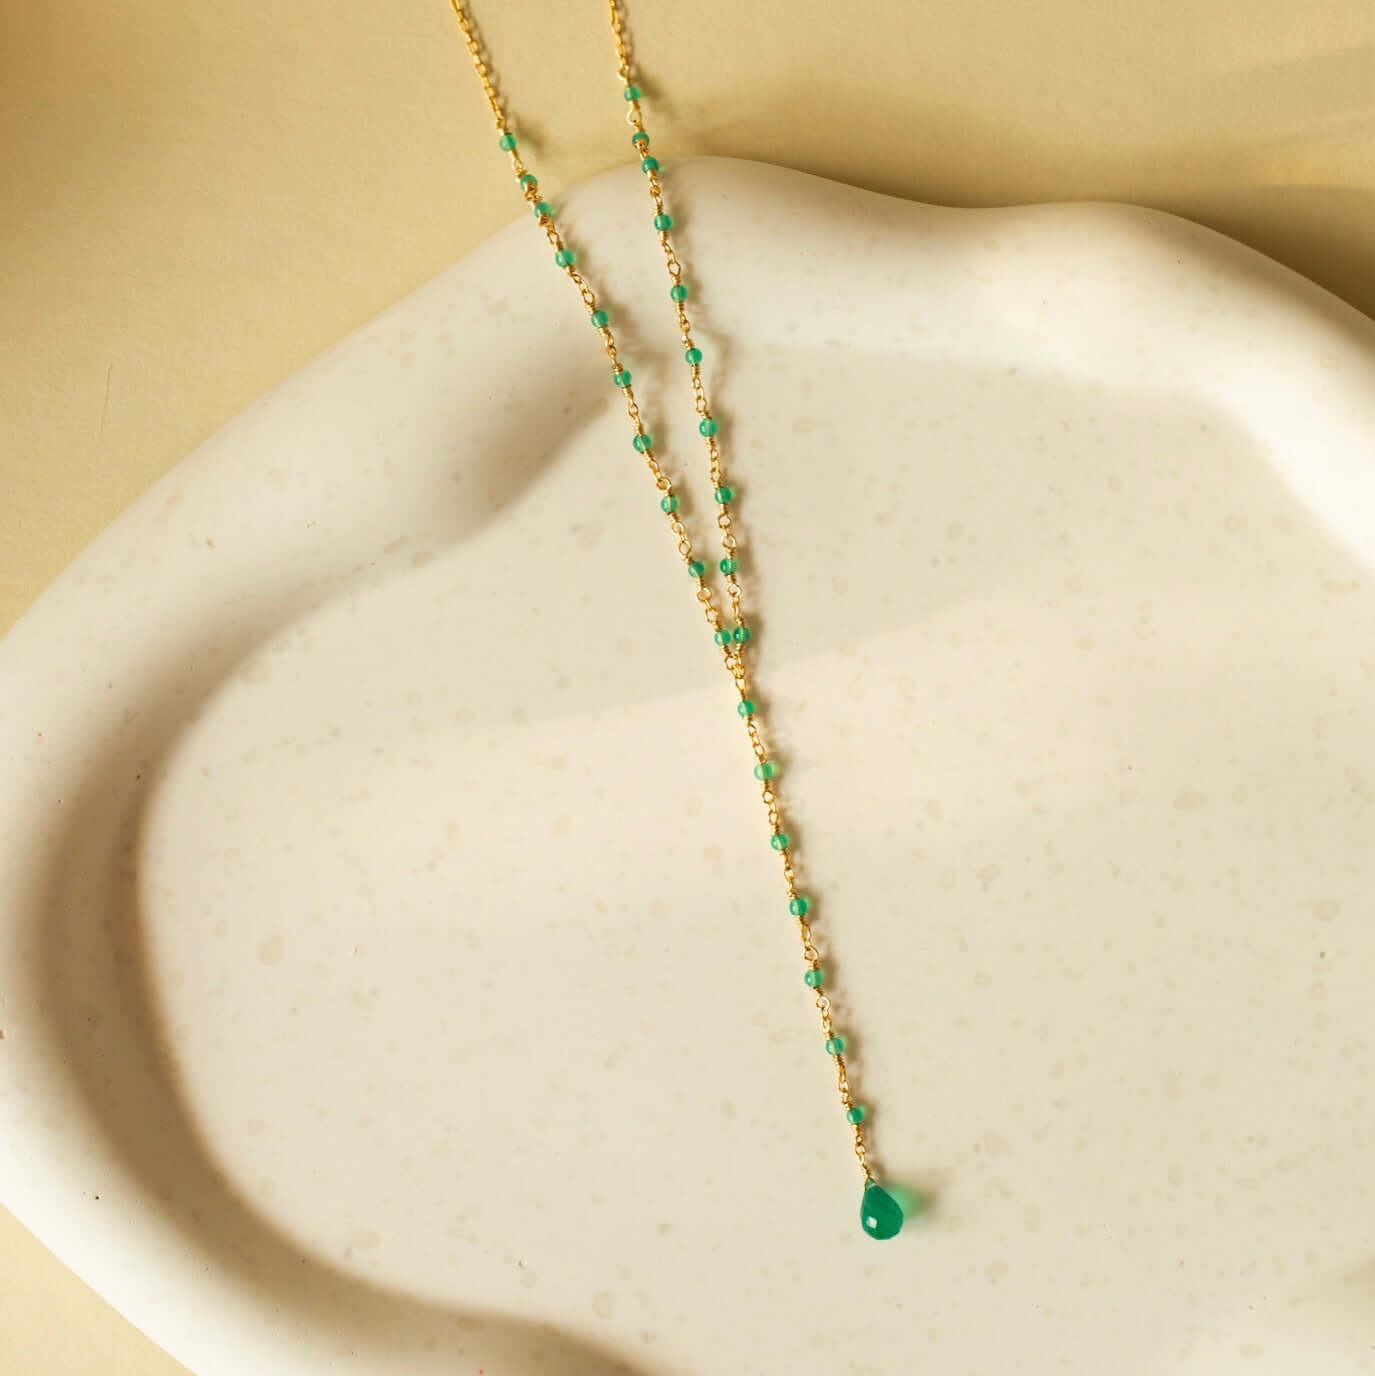 Green onyx necklace on clay—laid-back charm with a hint of verdant beauty.